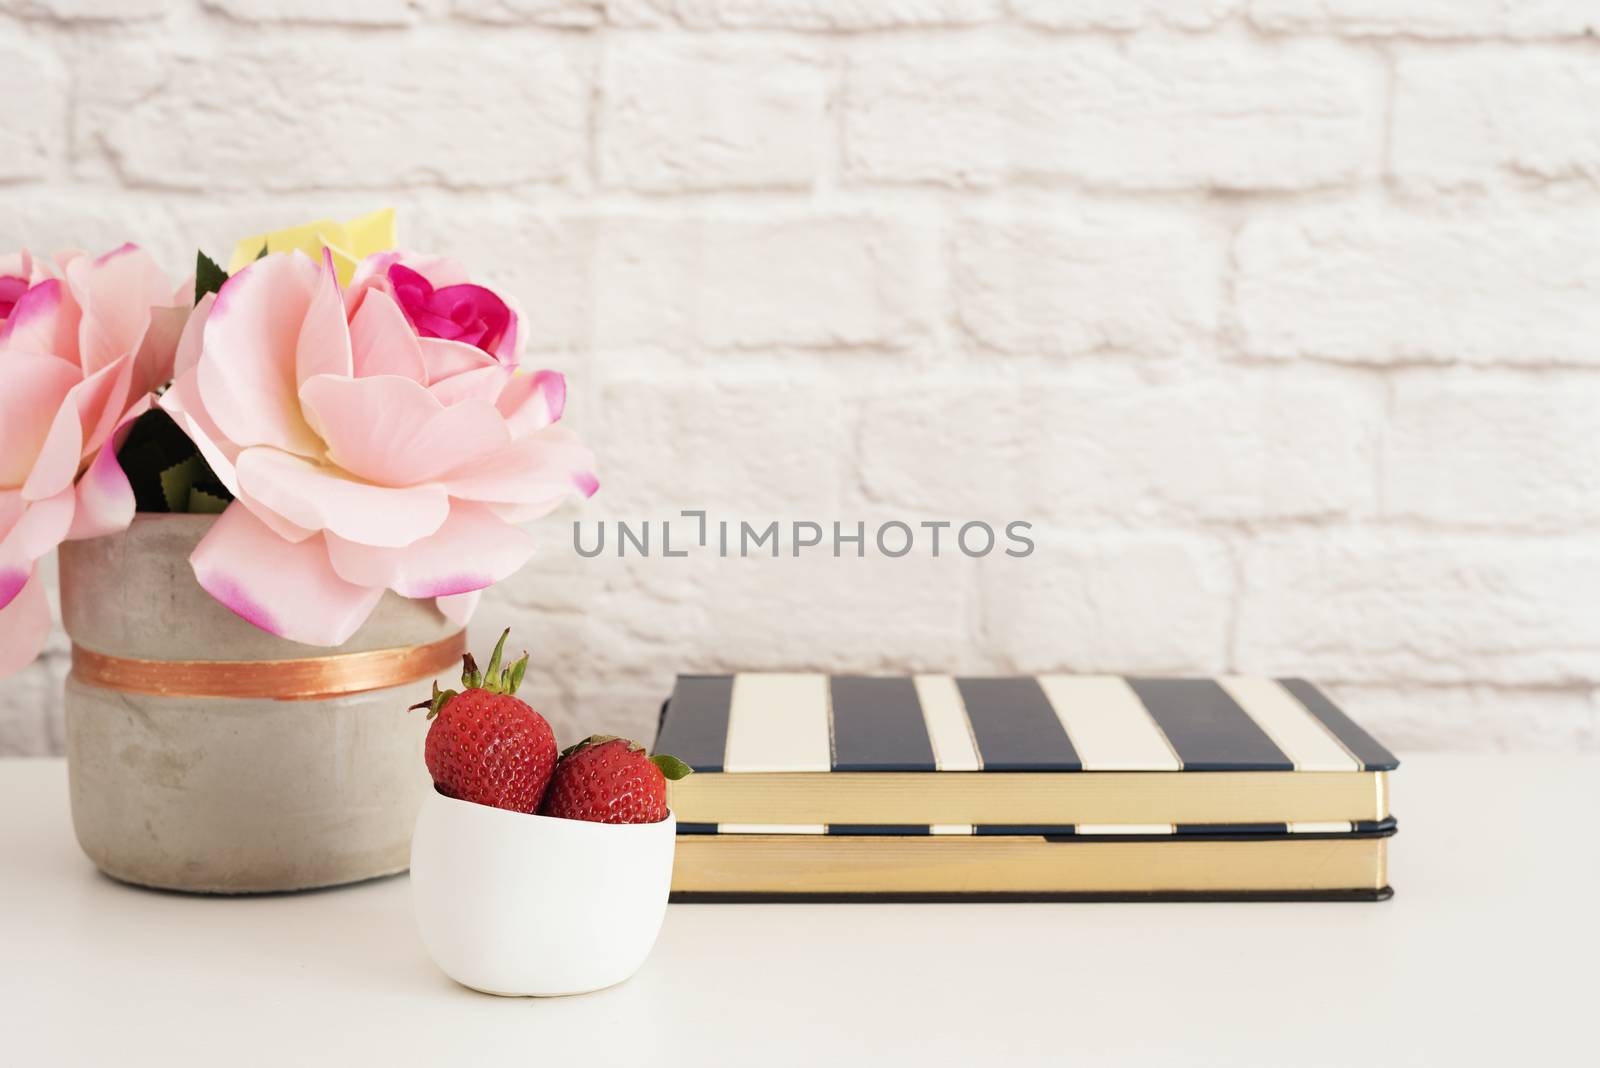 Pink Roses Mock Up. Styled Photography. Brick Wall Product Display. Strawberries On Striped Design Notebooks. Vase With Pink Roses. Fashion Lifestyle